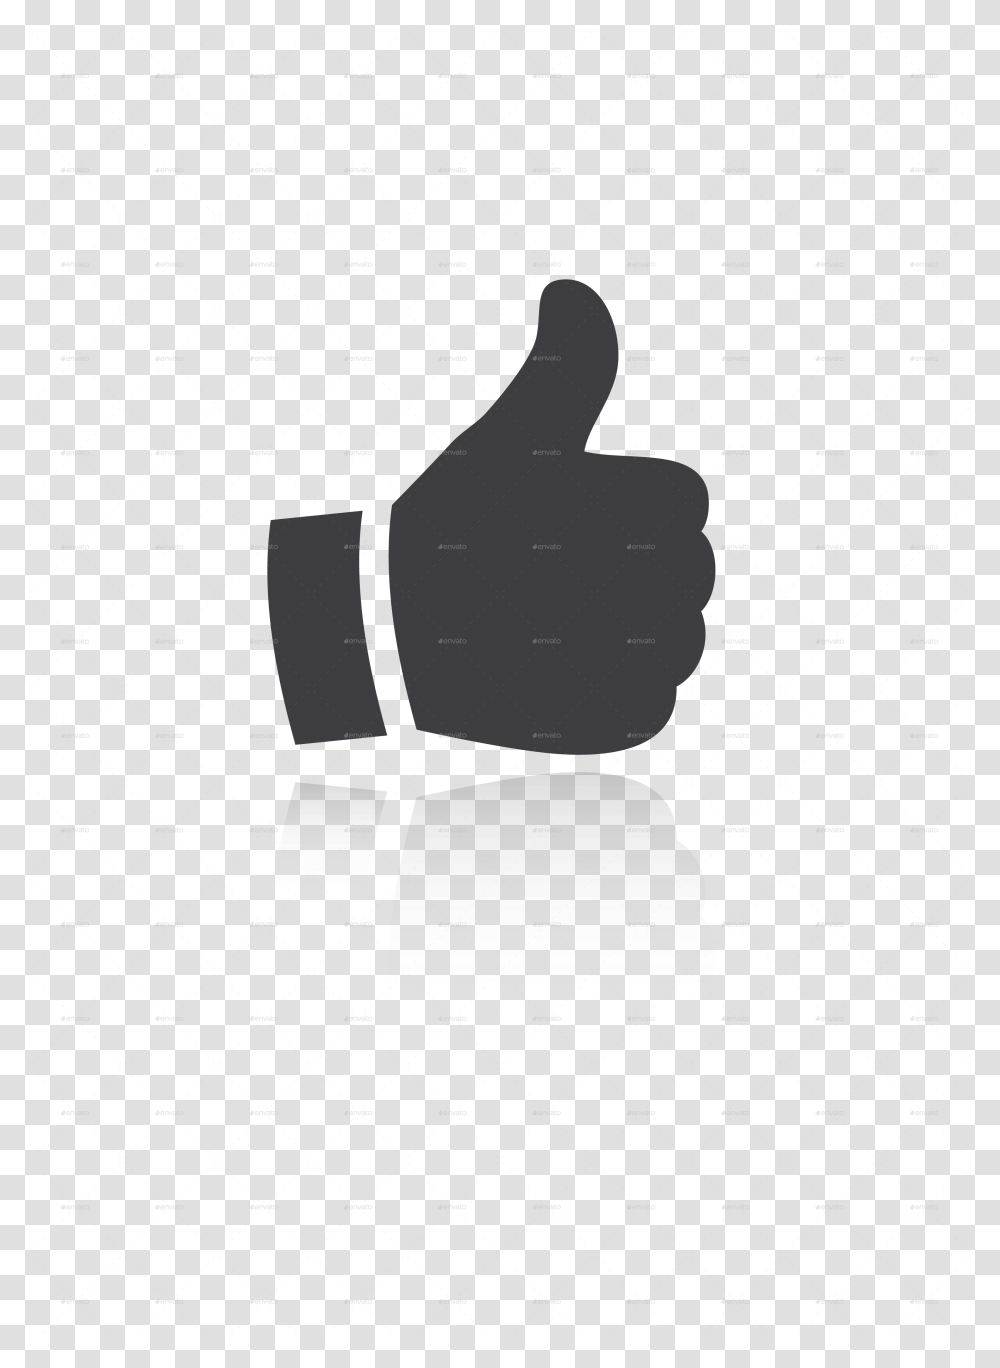 Thumb Up Icon Illustration, Weapon, Bomb, Nature Transparent Png